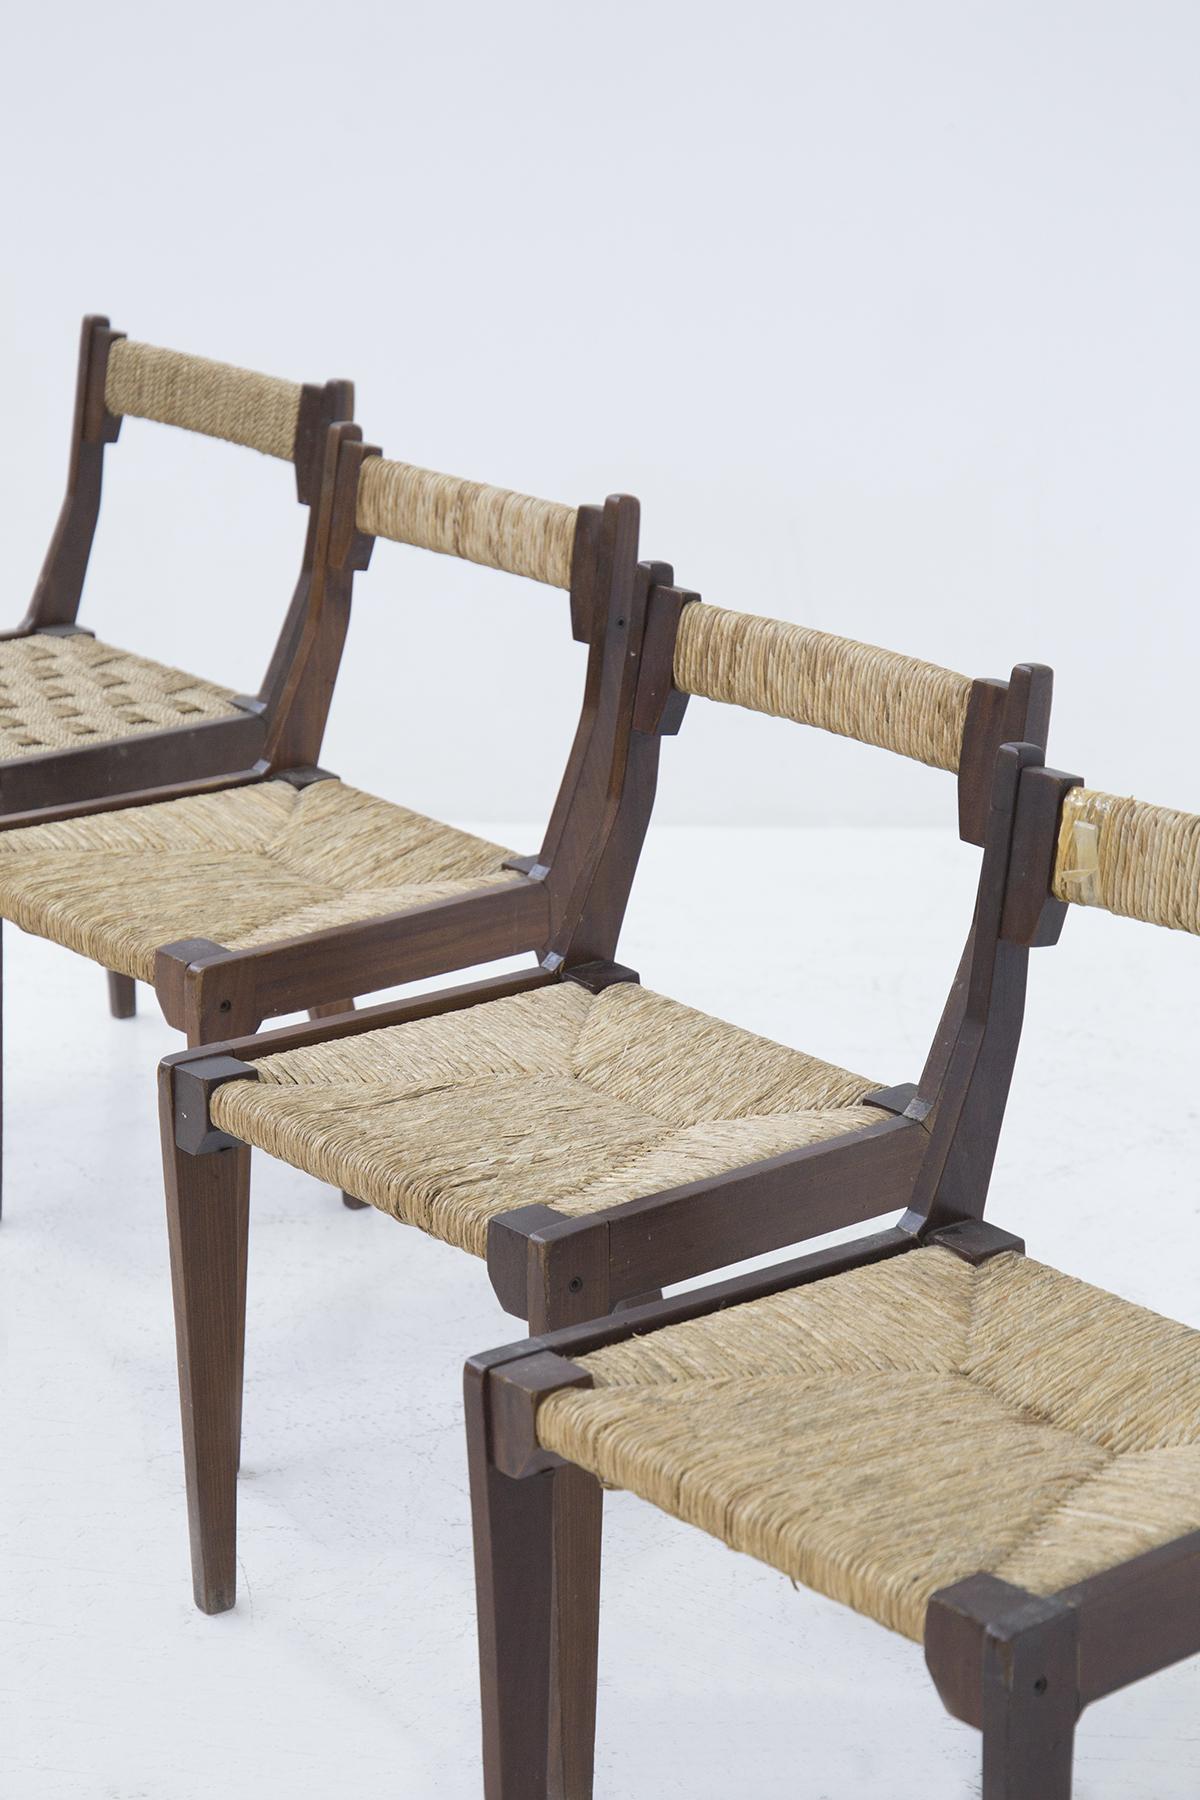 Very nice set of four chairs designed by Carlo Santi for the manufacture Arform from the 1950s, fine Italian manufacture.
The chairs are a total of 4. They have a wooden supporting frame, there are 4 supporting legs and they are quite stiff, very